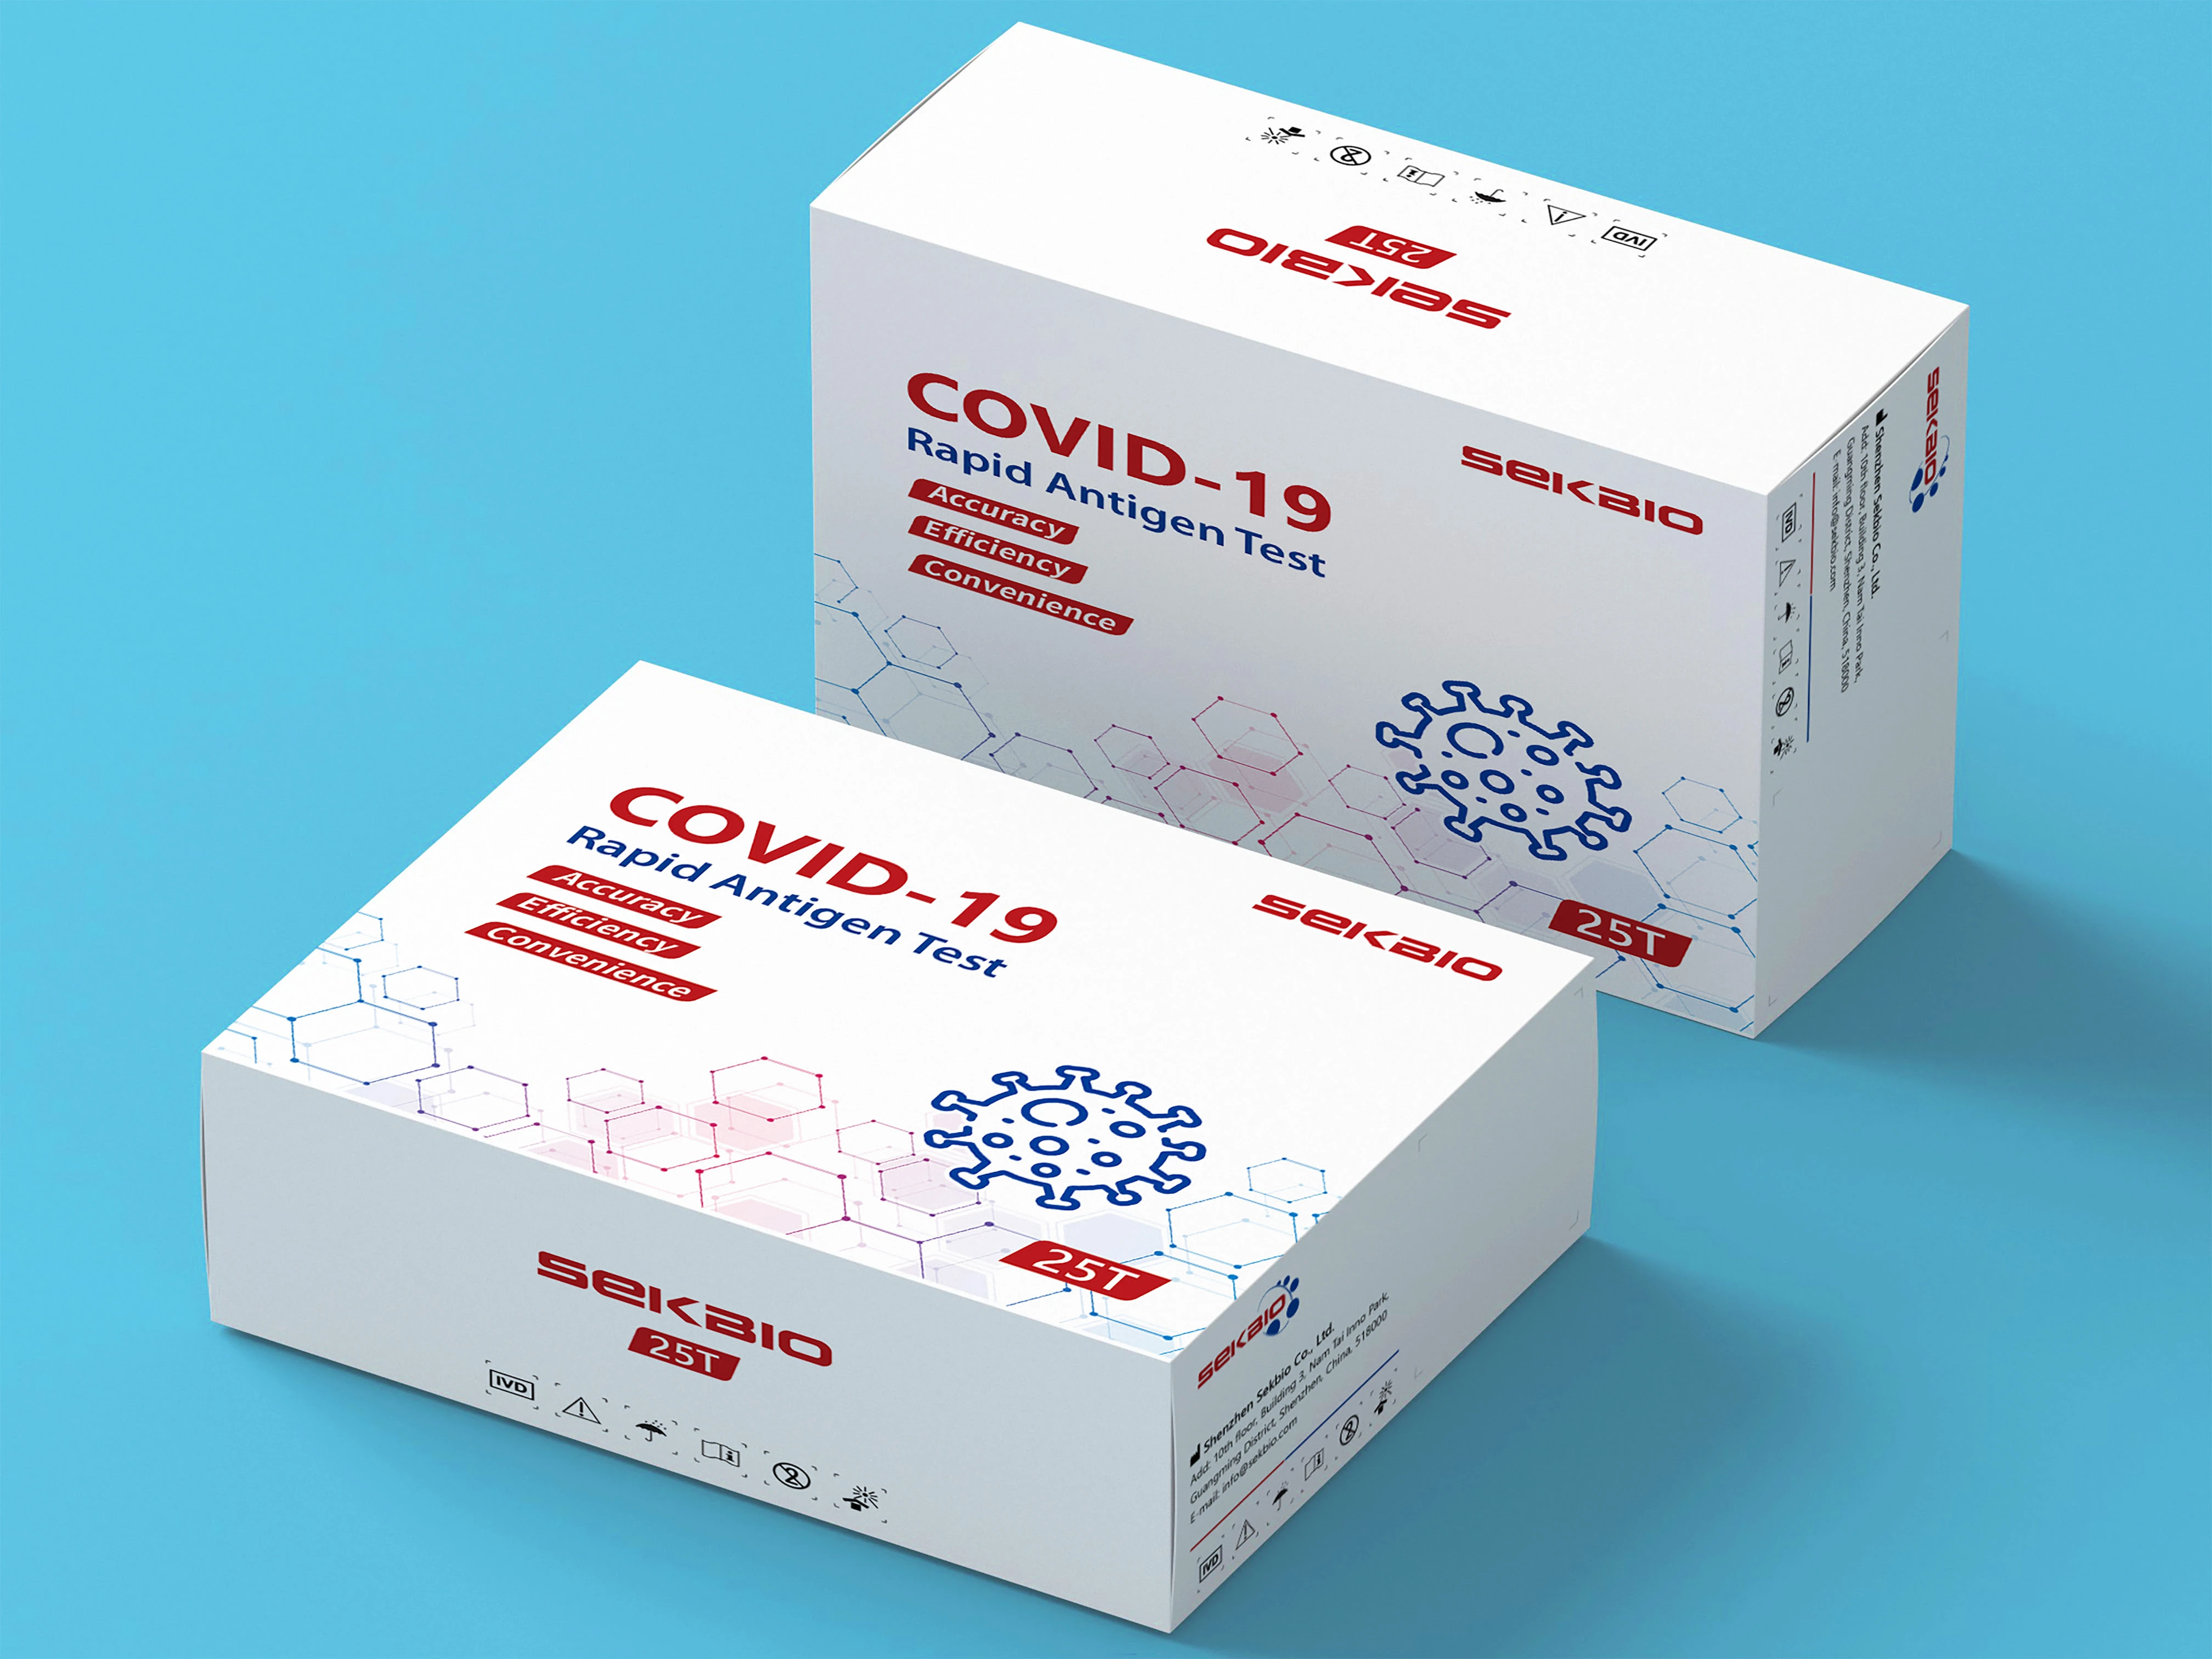 The Most Potent New COVID-19 Variant Strikes, Rapidly Spreading in 12 Countries Worldwide